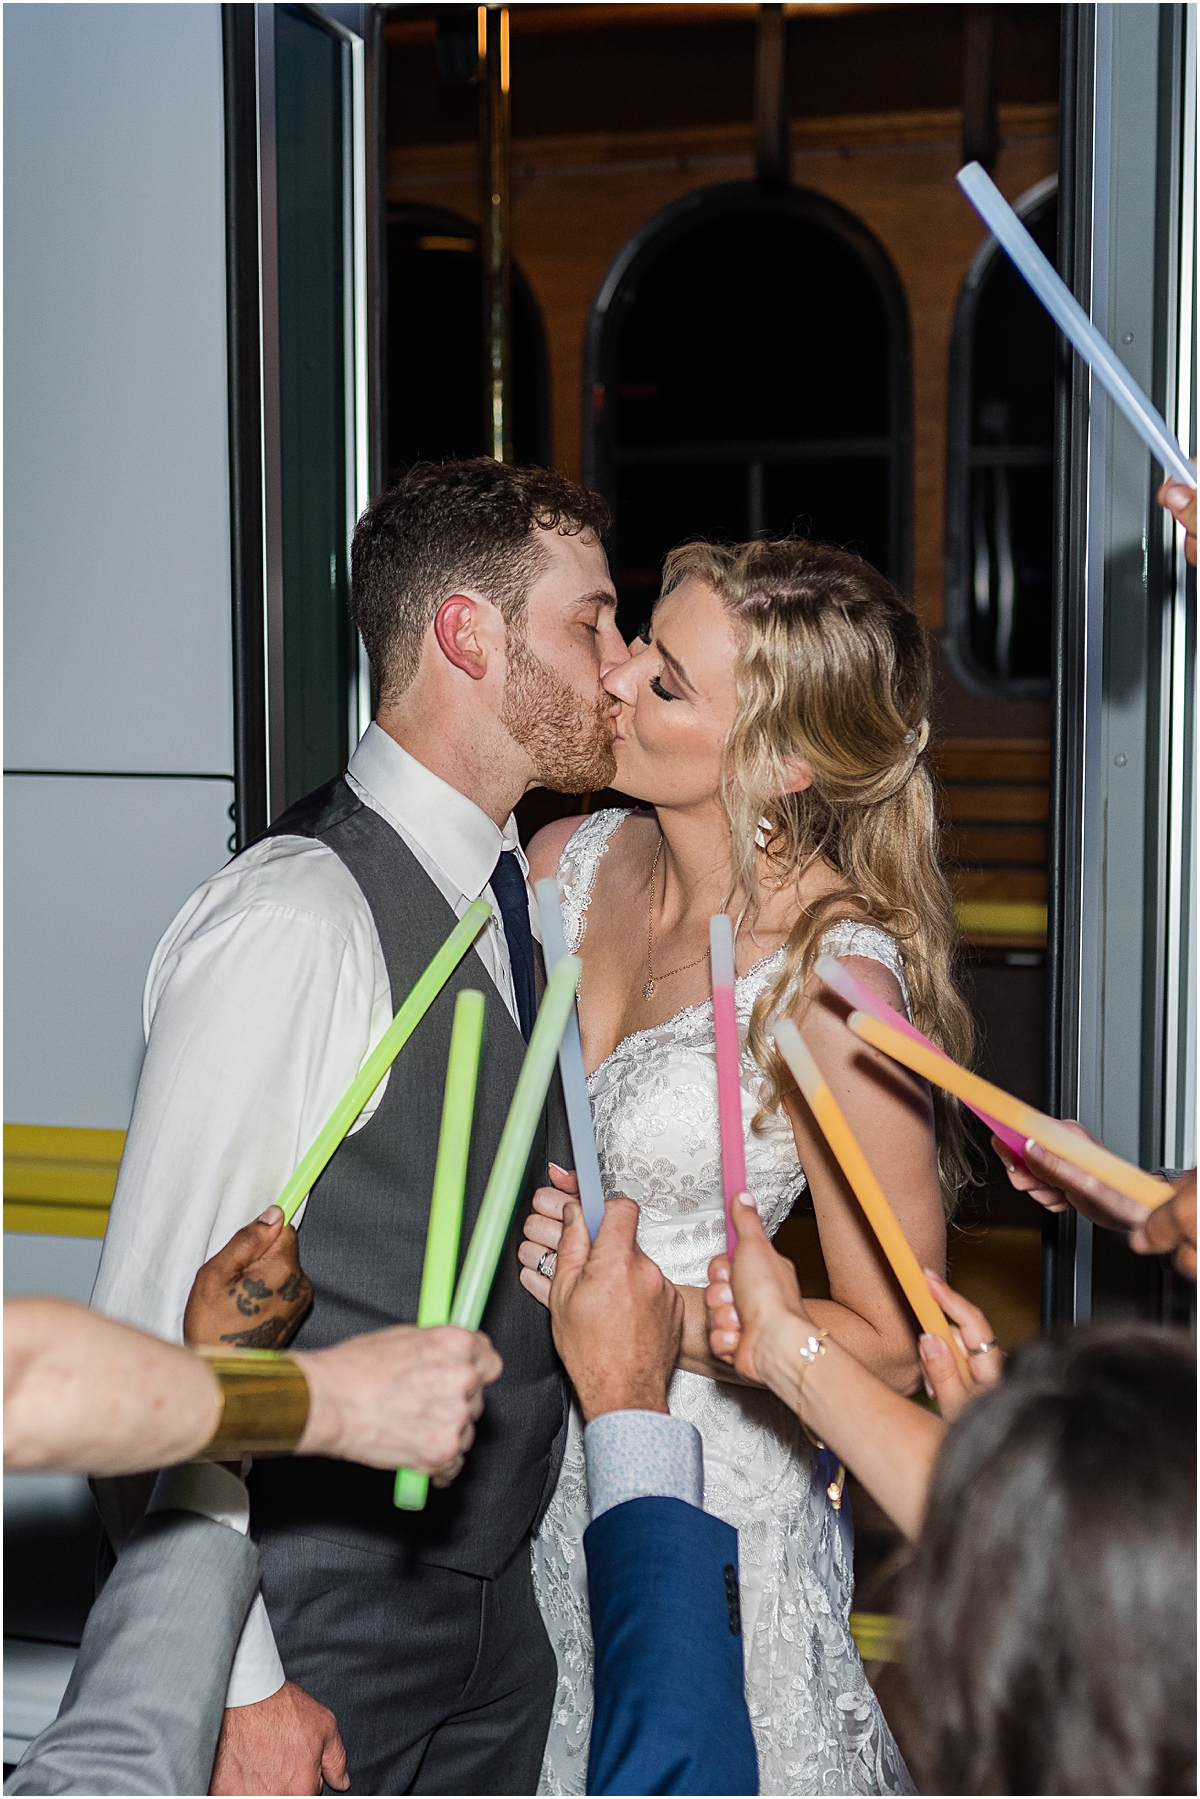 Amber and Chase kissing with lots of glowsticks around them during their Greensboro wedding